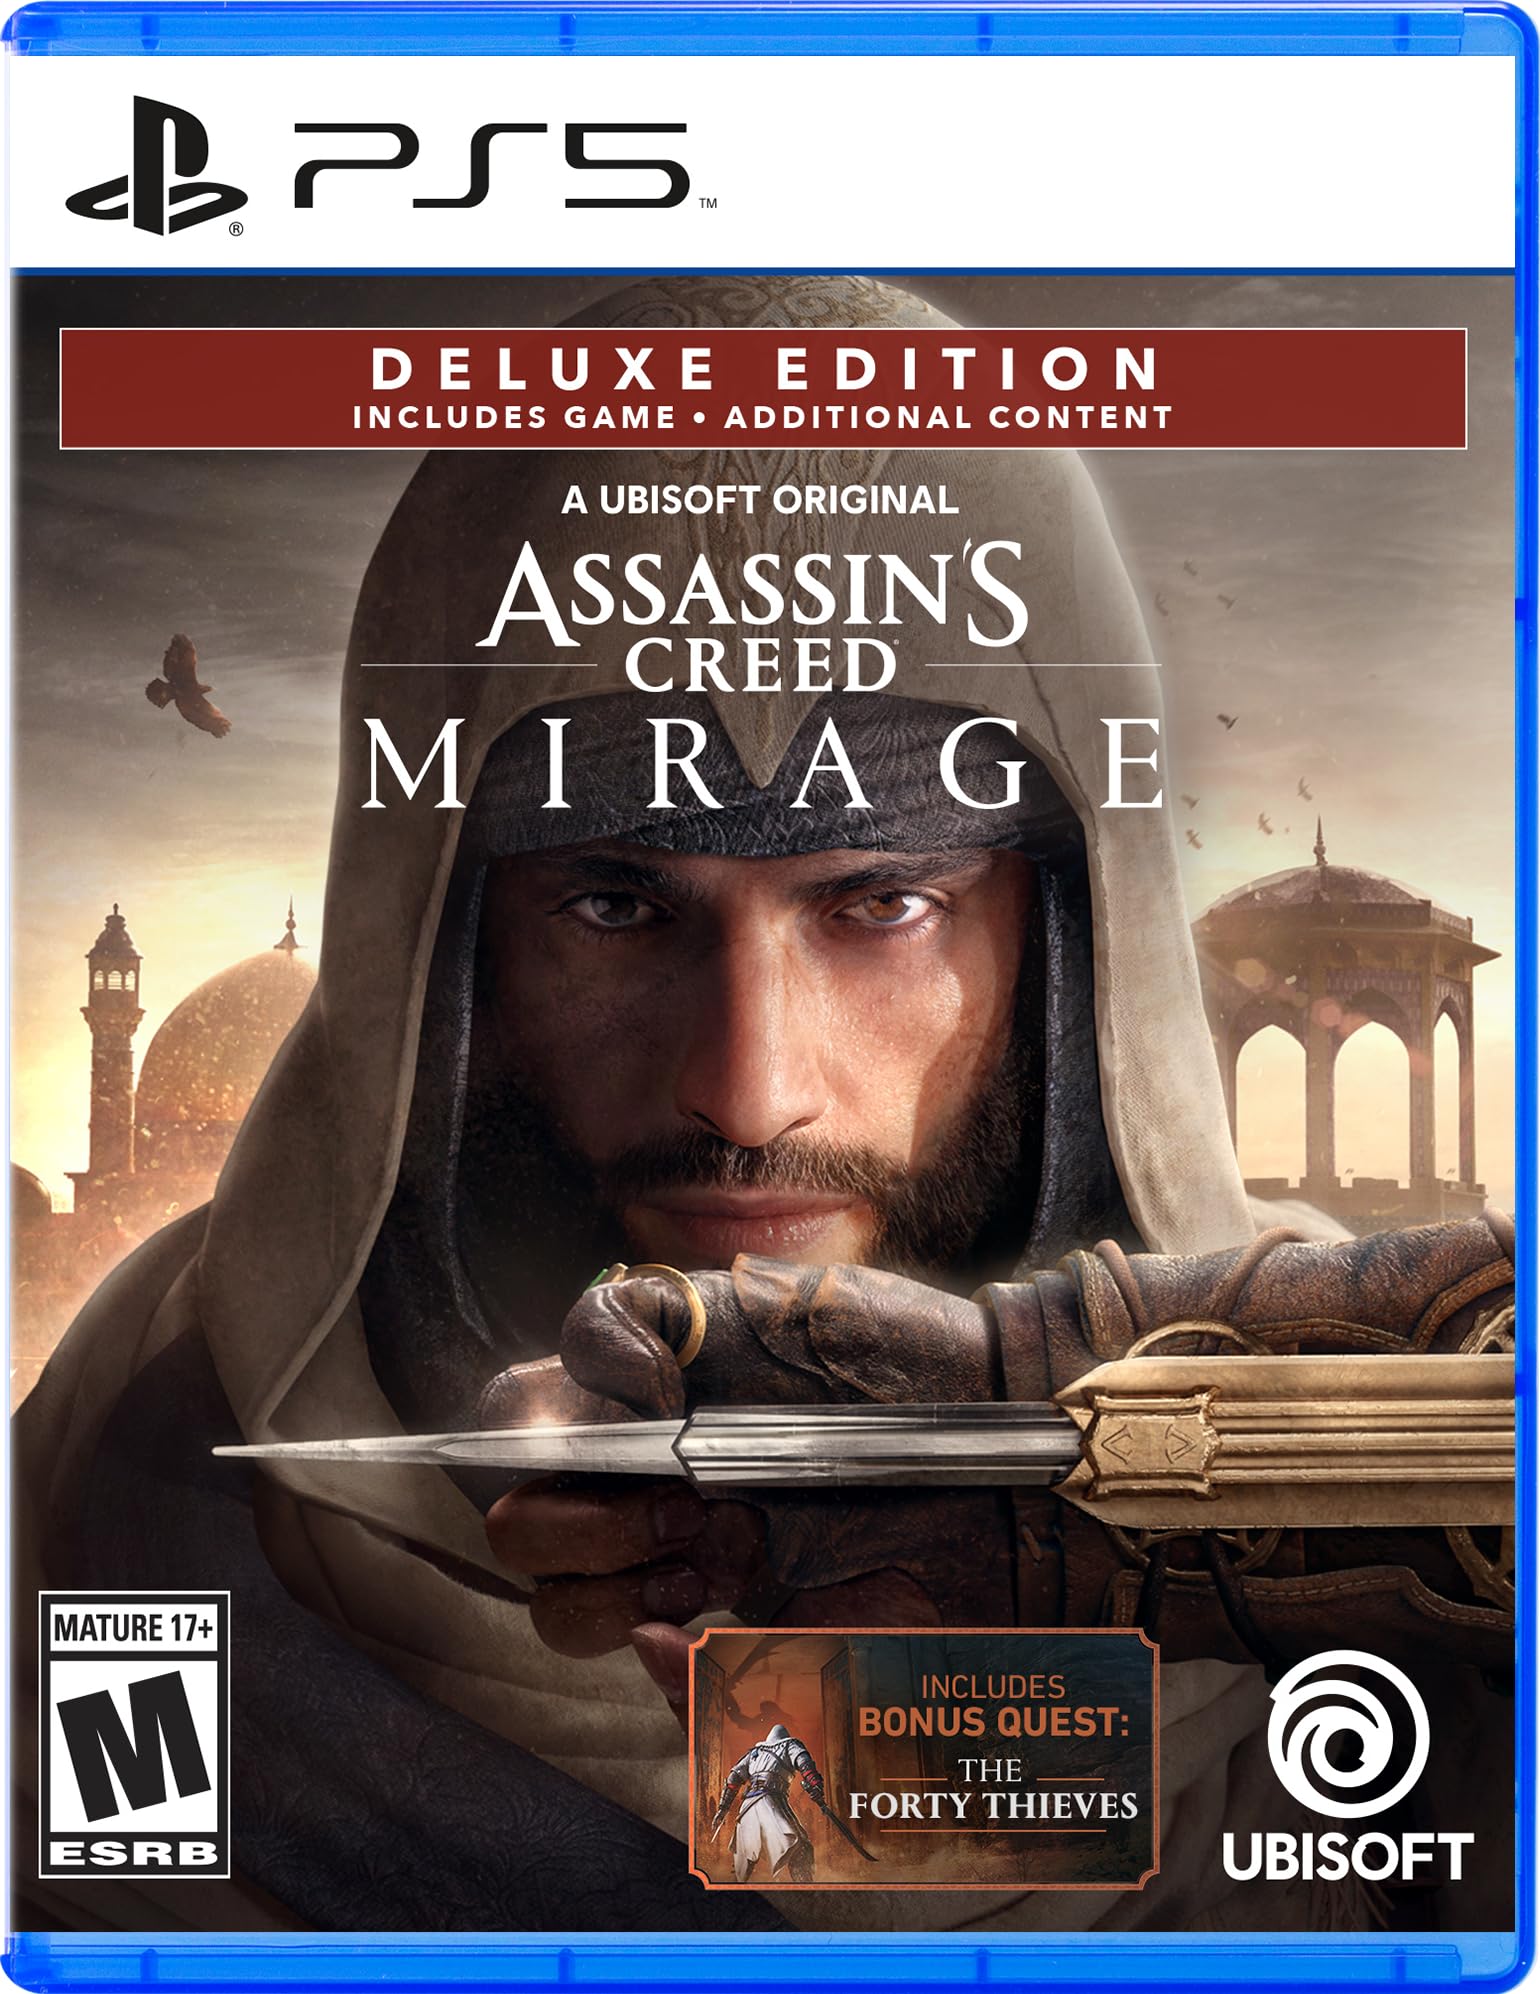 Assassin's Creed Mirage Deluxe Edition (PS5 or PS4) $30 + Free Shipping w/ Prime or on orders over $35